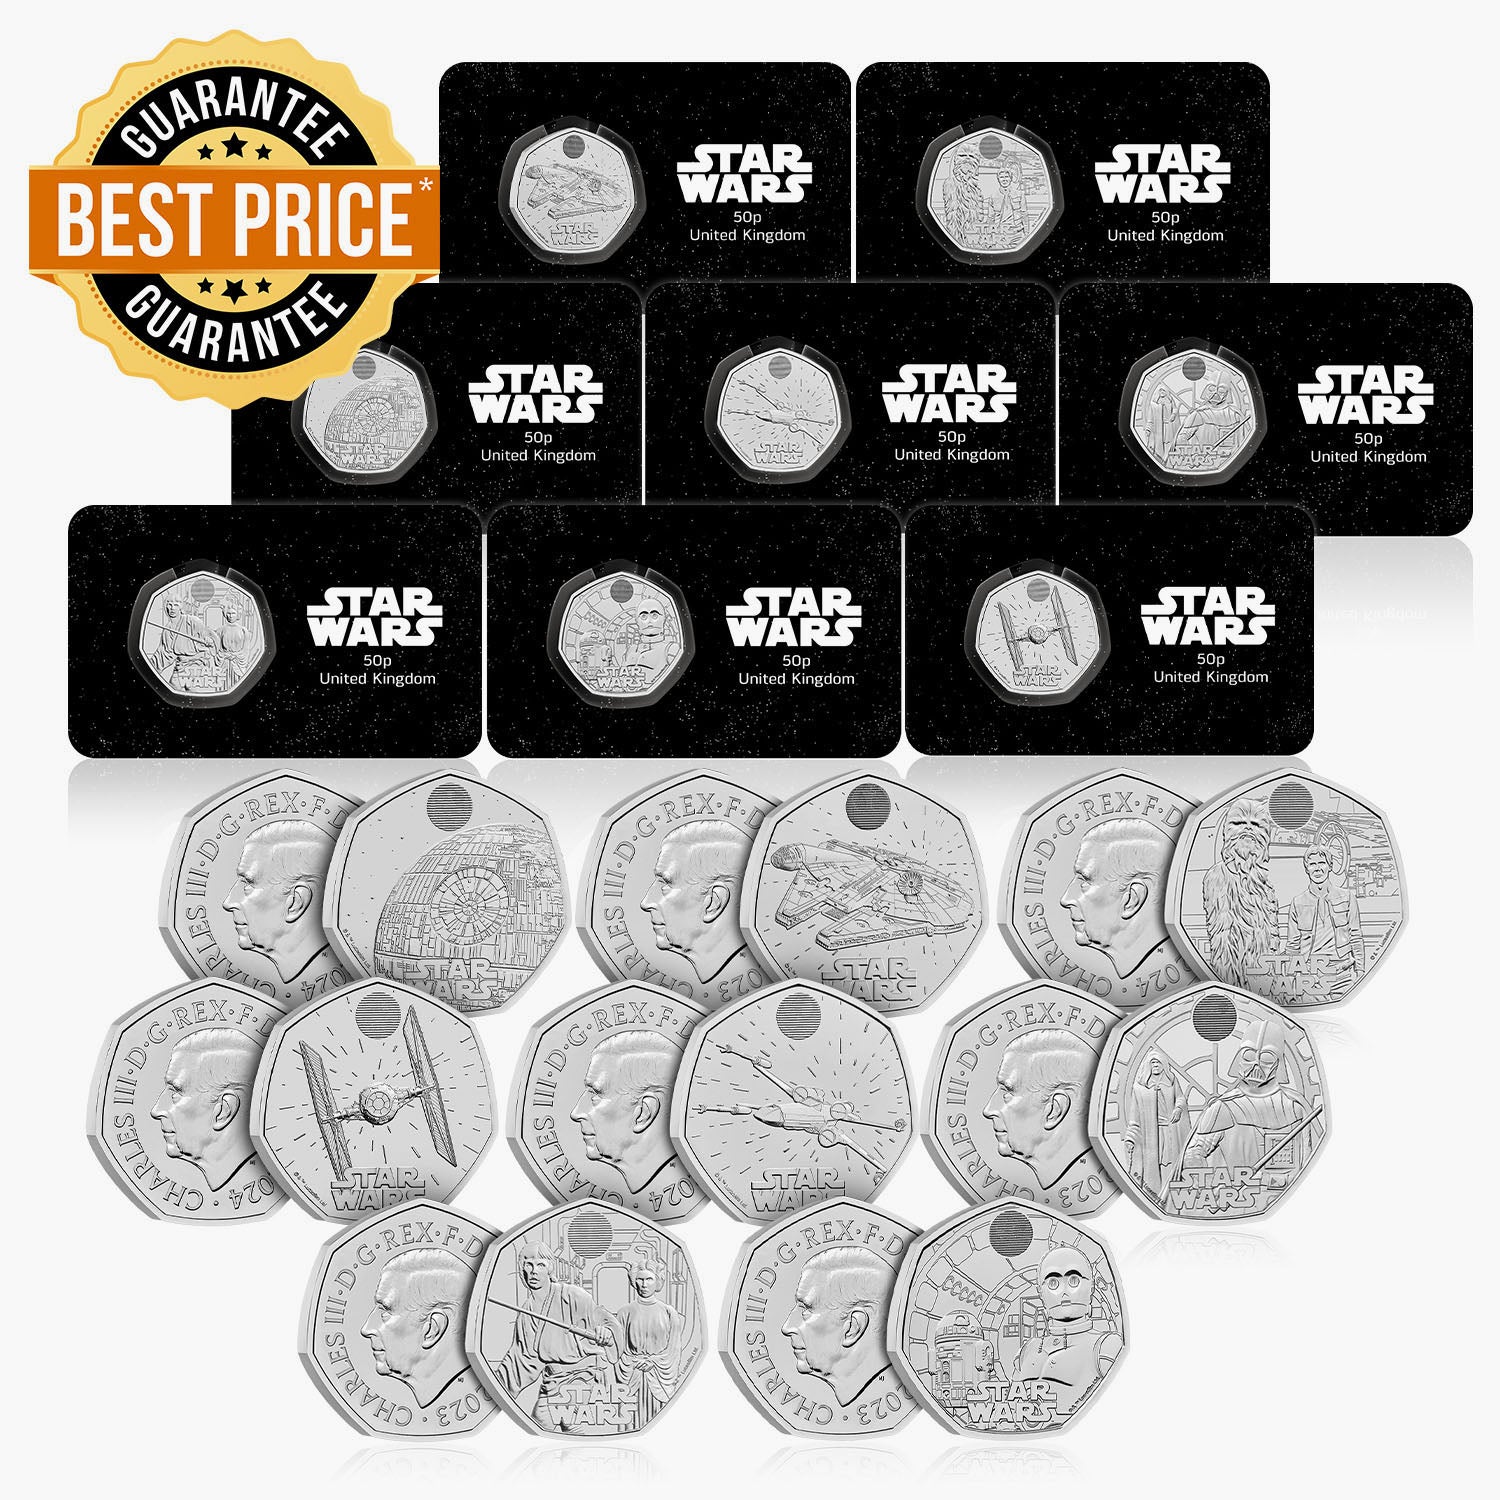 Star Wars Duos & Vehicles Complete UK 50p Coin Set